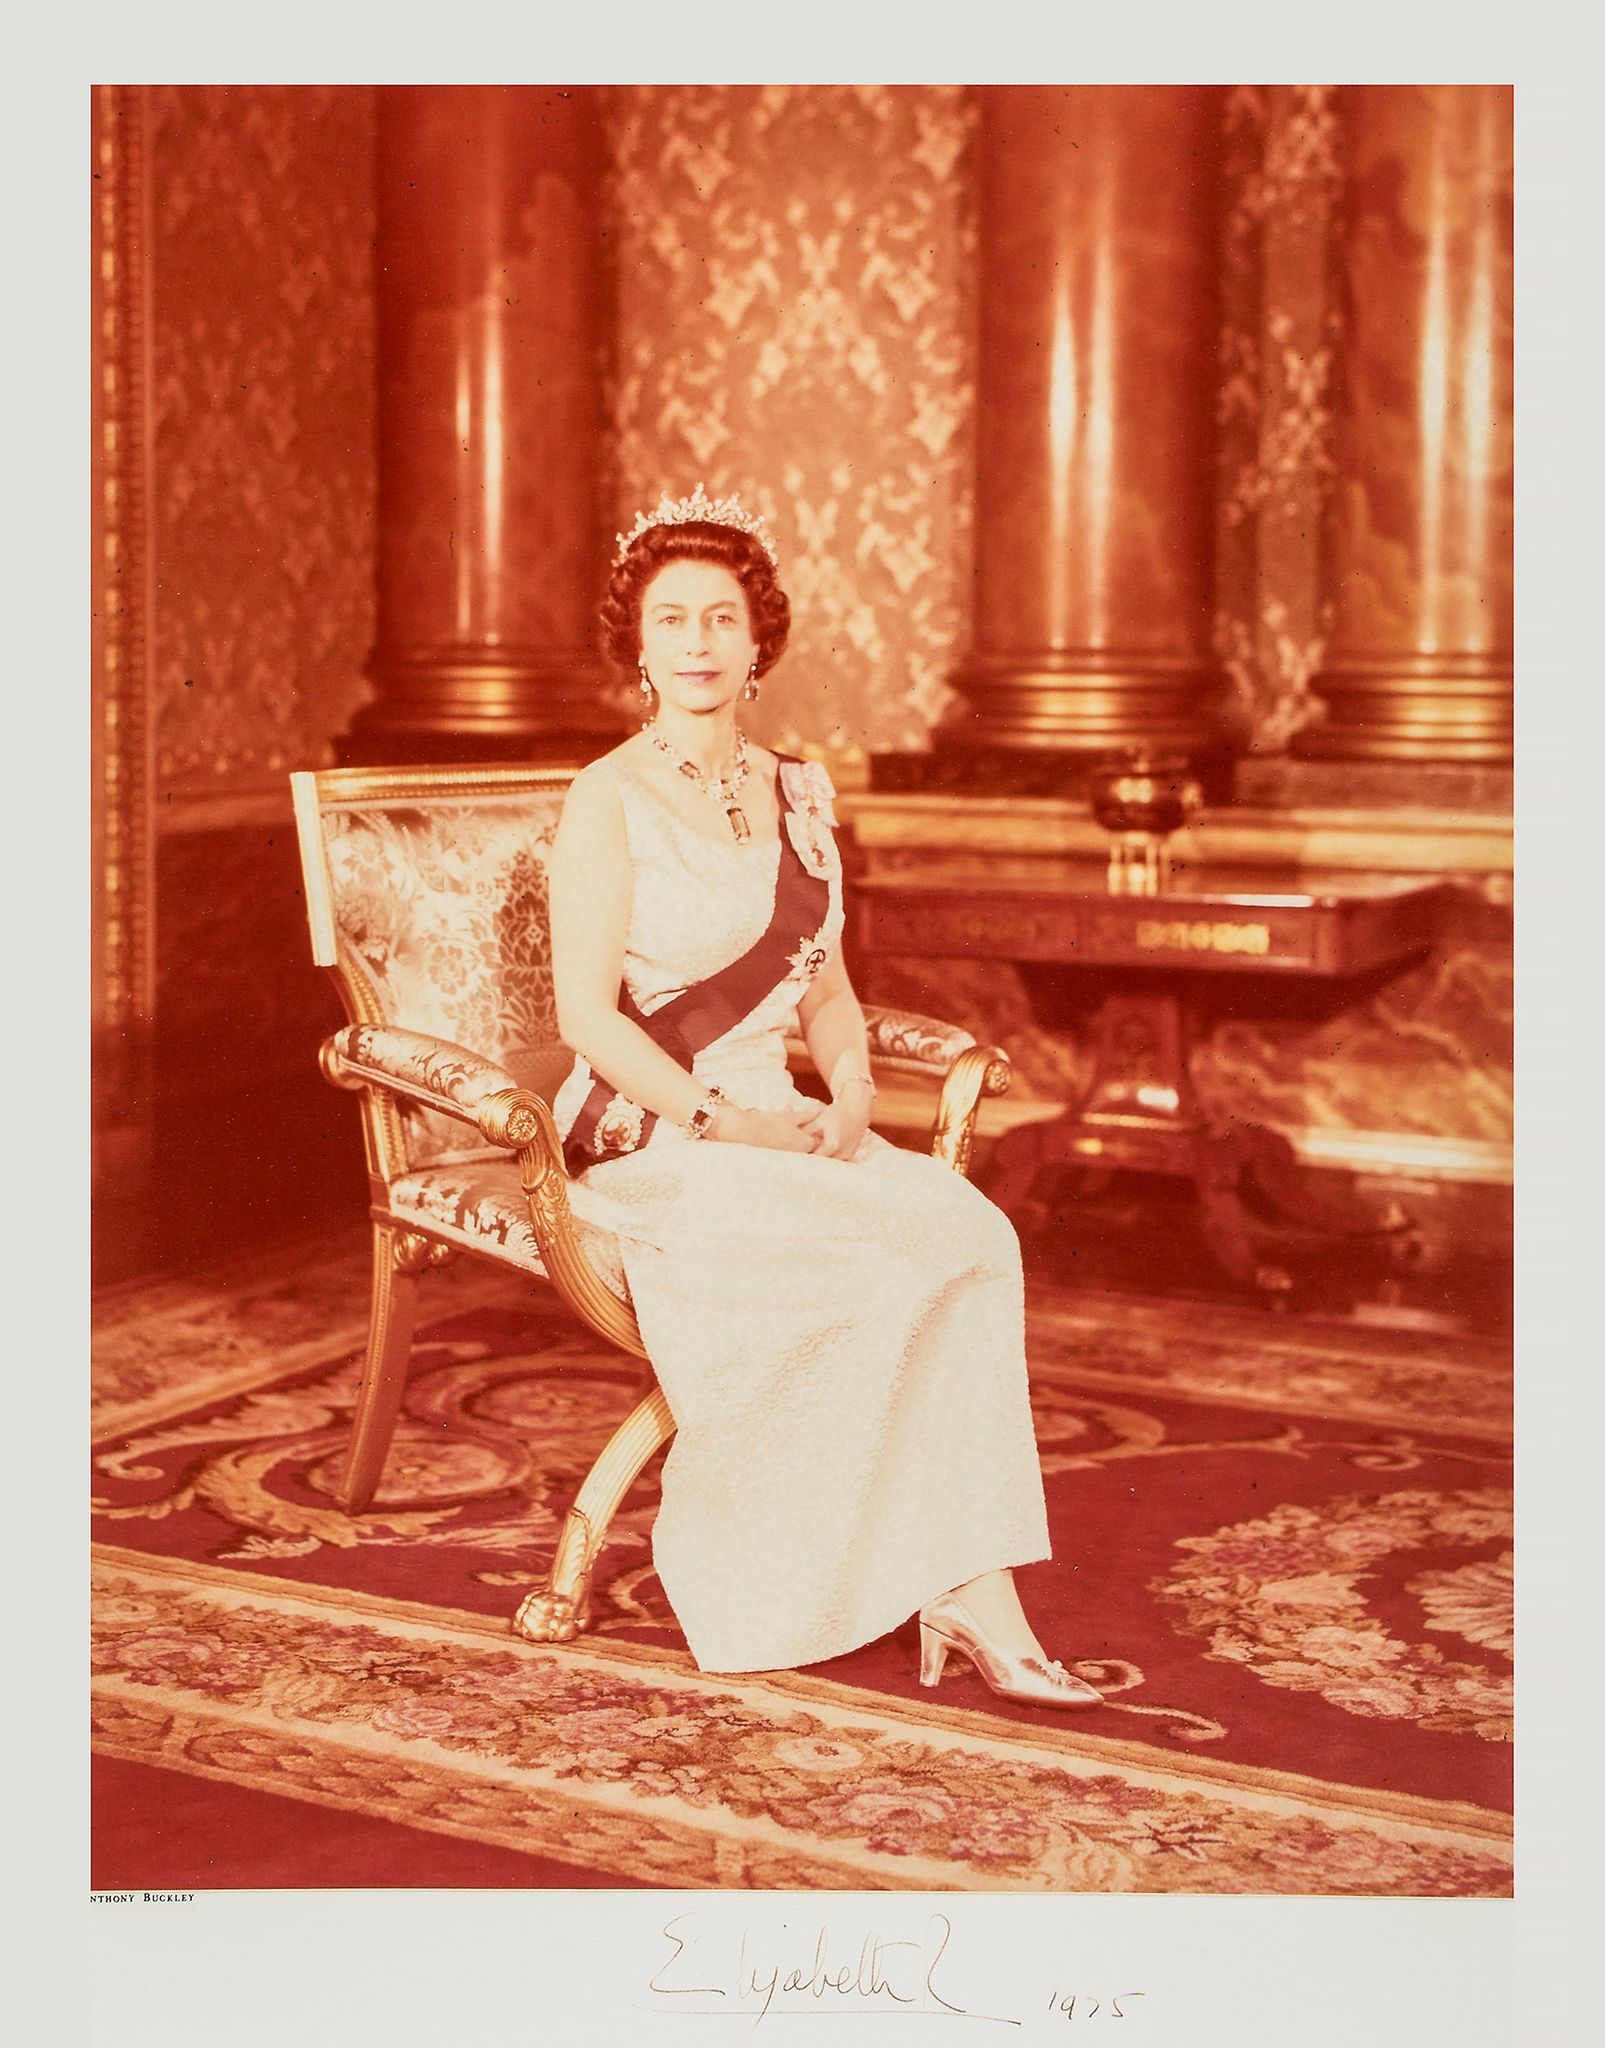 ELIZABETH II, QUEEN & PRINCE PHILIP - A. BUCKLEY - Pair of full length amber-toned photographs by